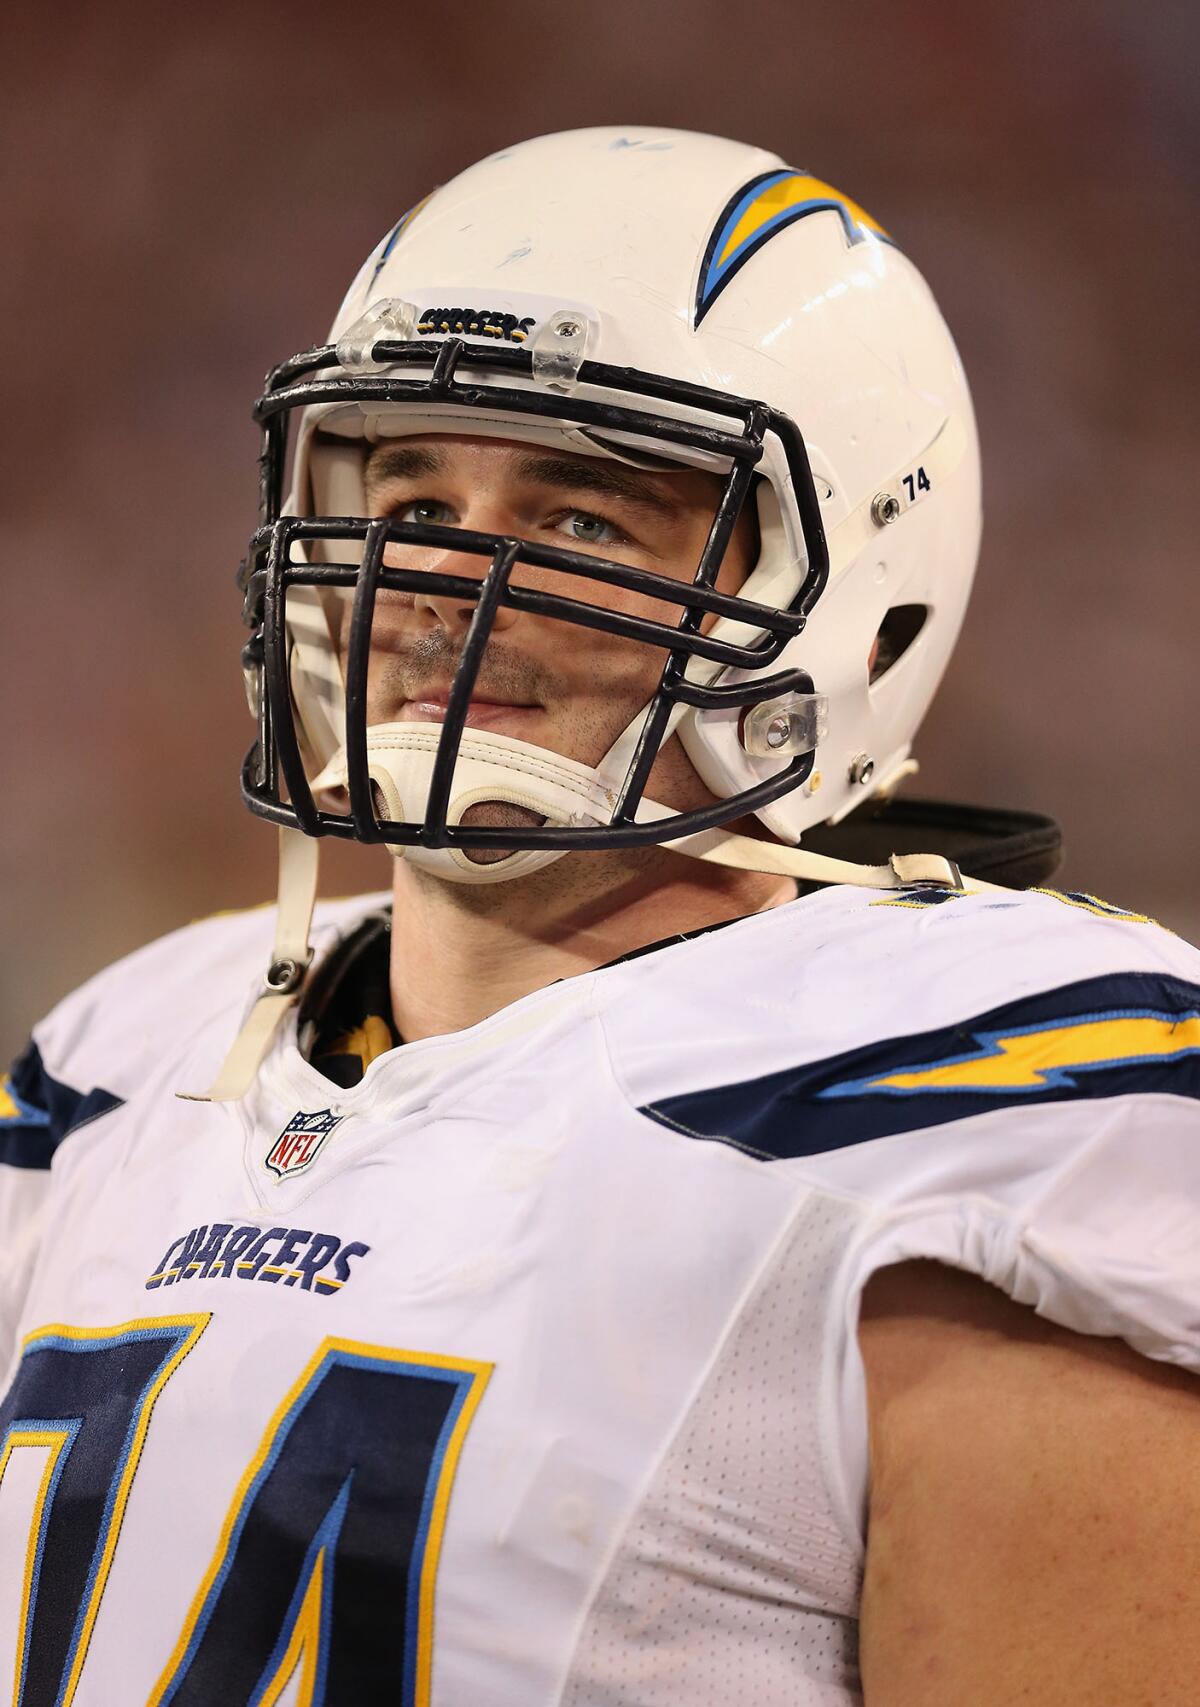 Rich Ohrnberger on the sidelines during a game between the Chargers and the Arizona Cardinals in 2014 in Glendale, Ariz.